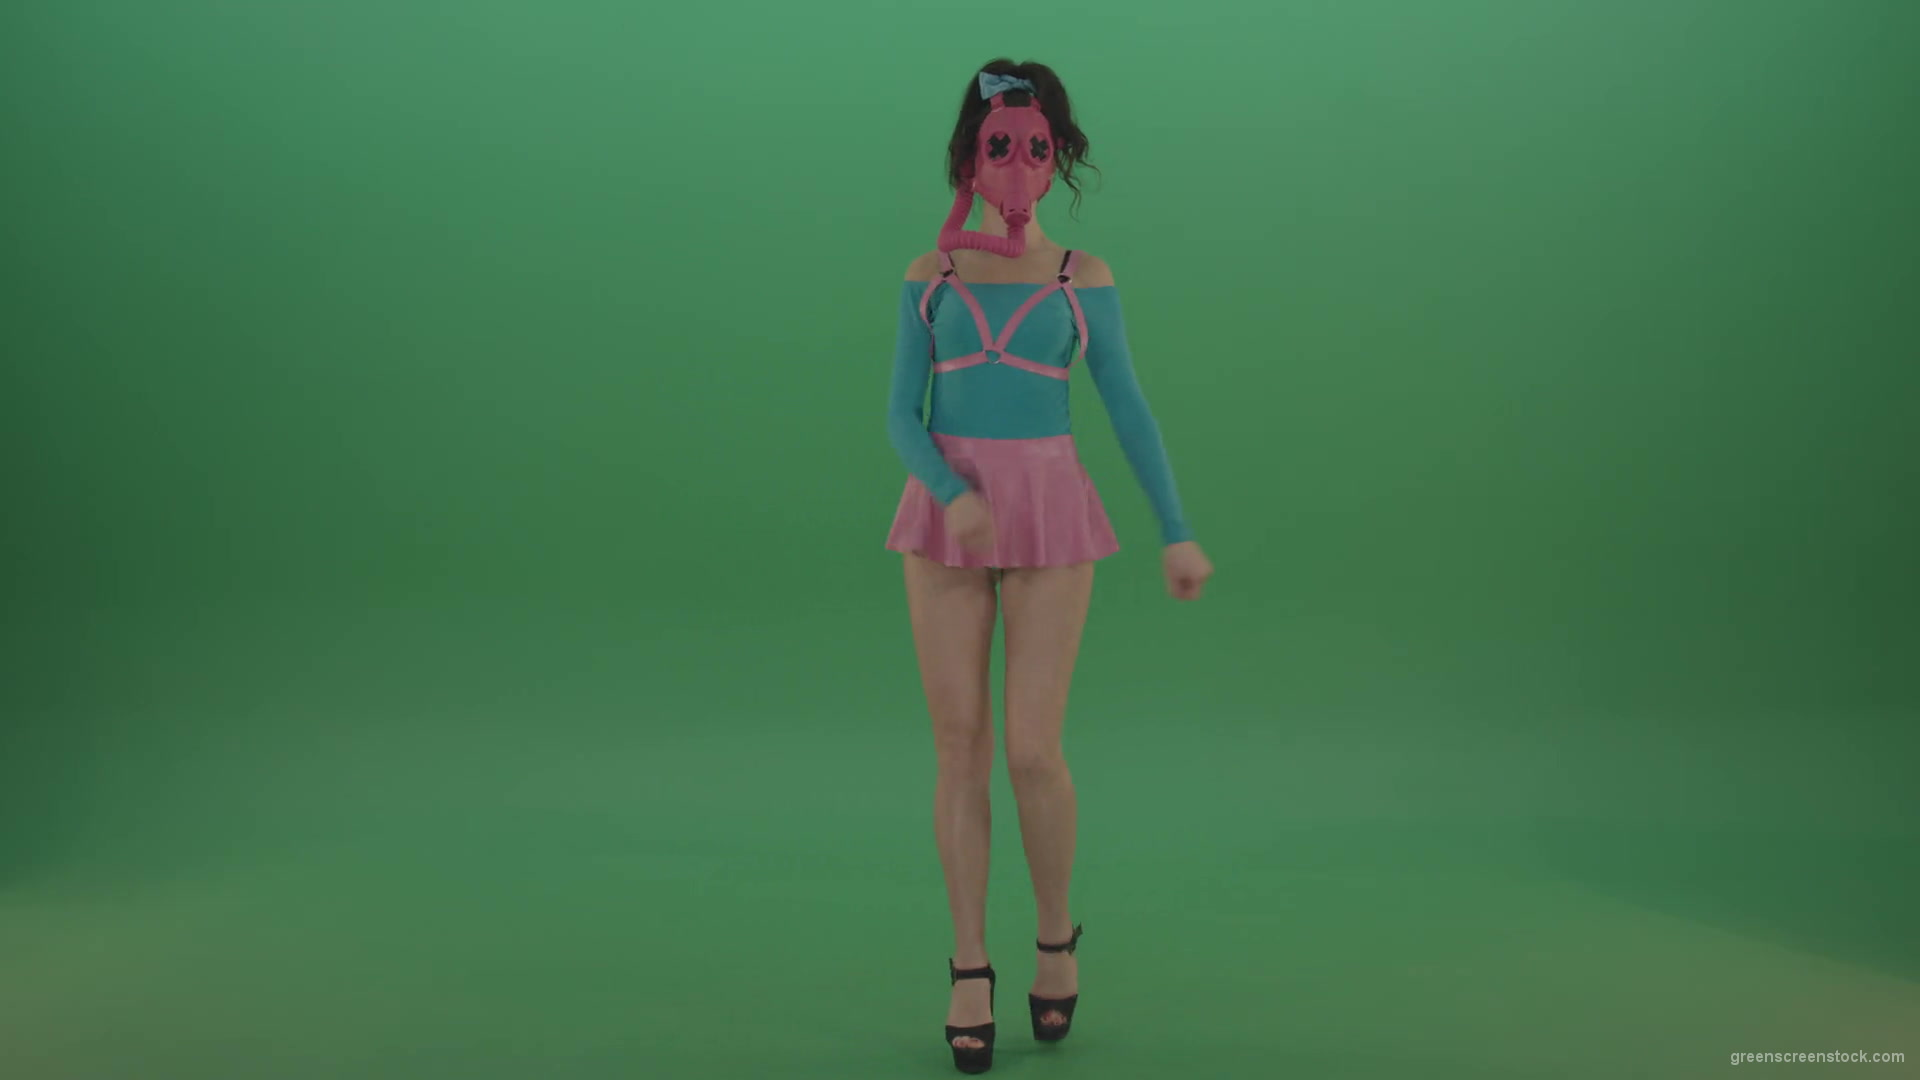 Sexy-Girl-in-Pink-Gas-Mask-marching-isolated-on-Green-Screen-4K-Video-Footage-1920_009 Green Screen Stock